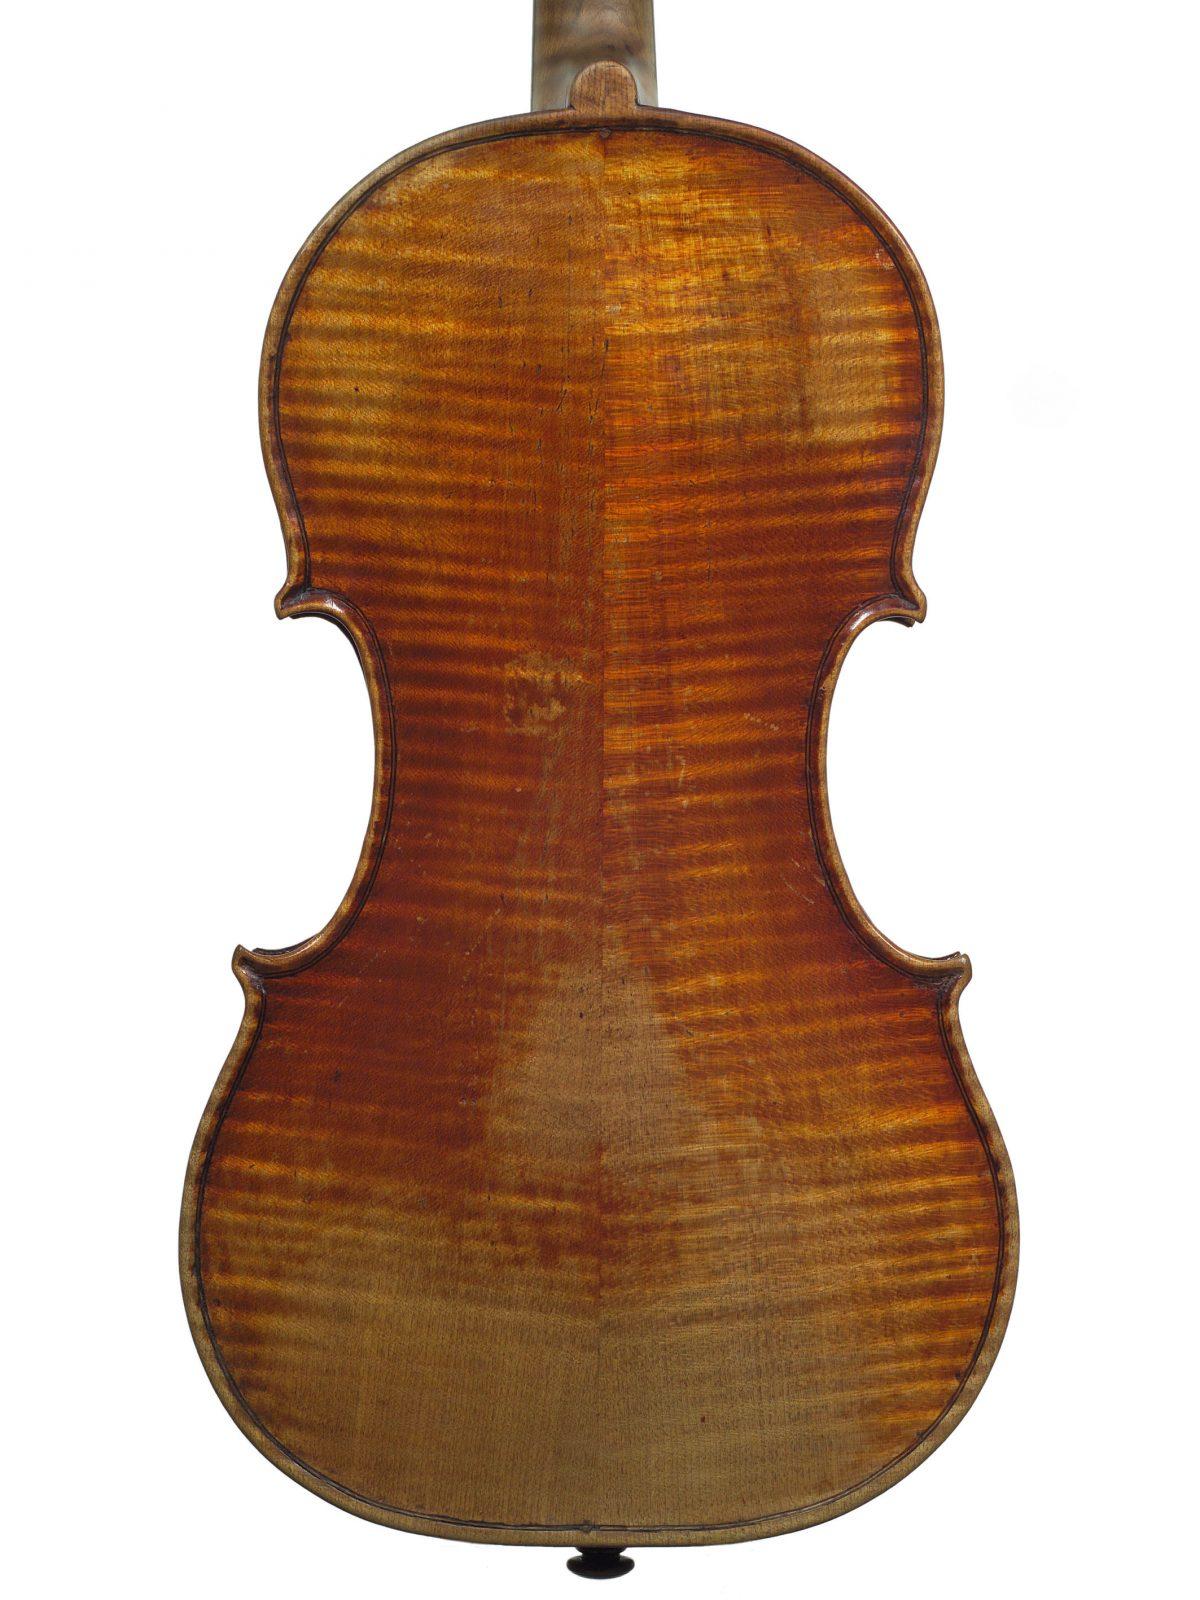 The 1743 Guarneri del Gesù "Il Cannone" remarkably has all its main pieces intact, and all its original varnish. (The City of Genoa)